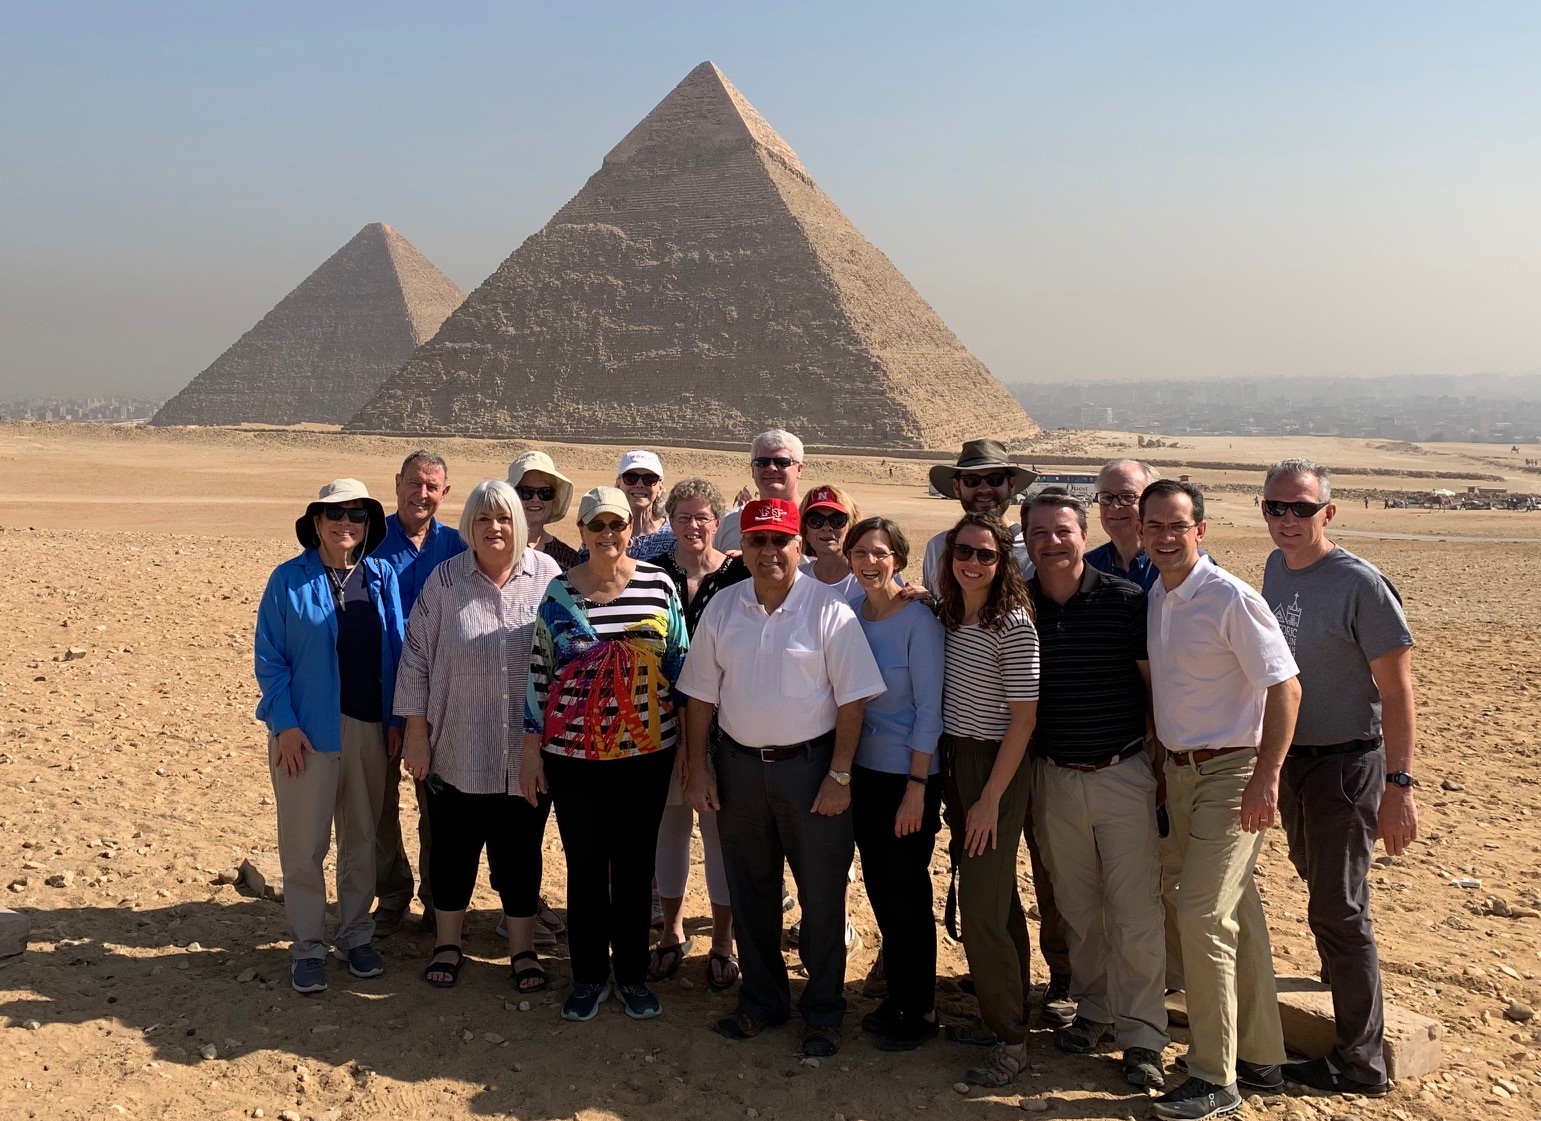  Our team at the Pyramids of Giza 